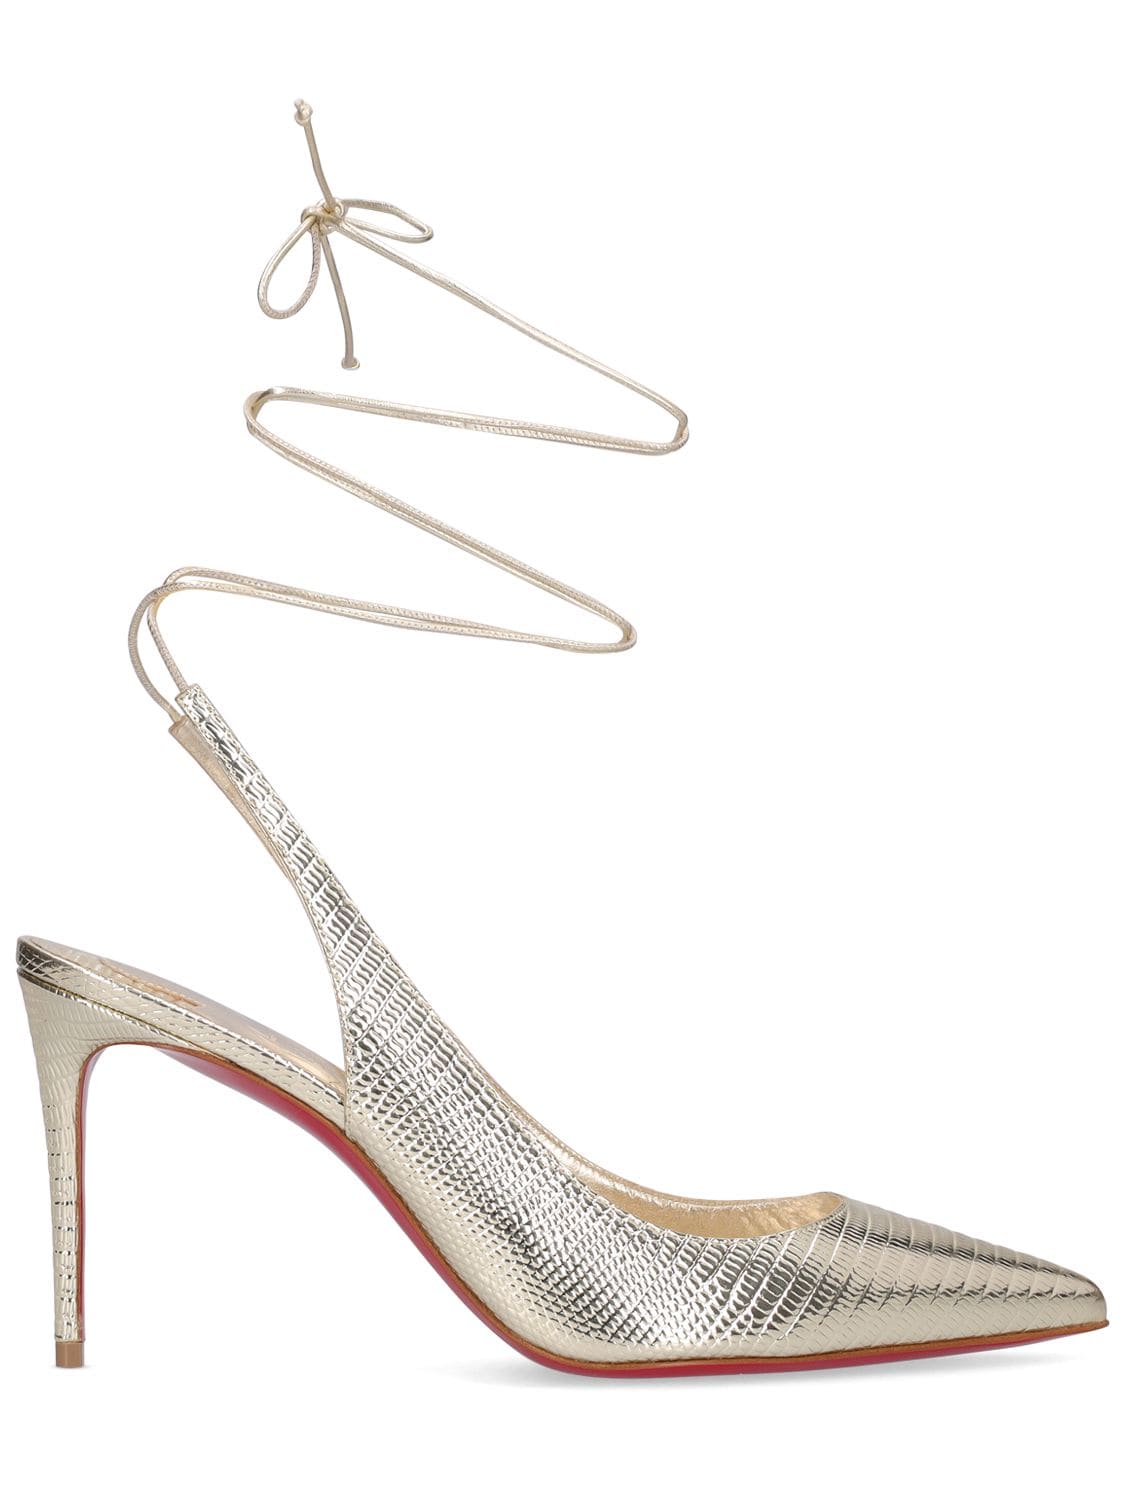 CHRISTIAN LOUBOUTIN 85mm Kate Croc Embossed Leather Pumps